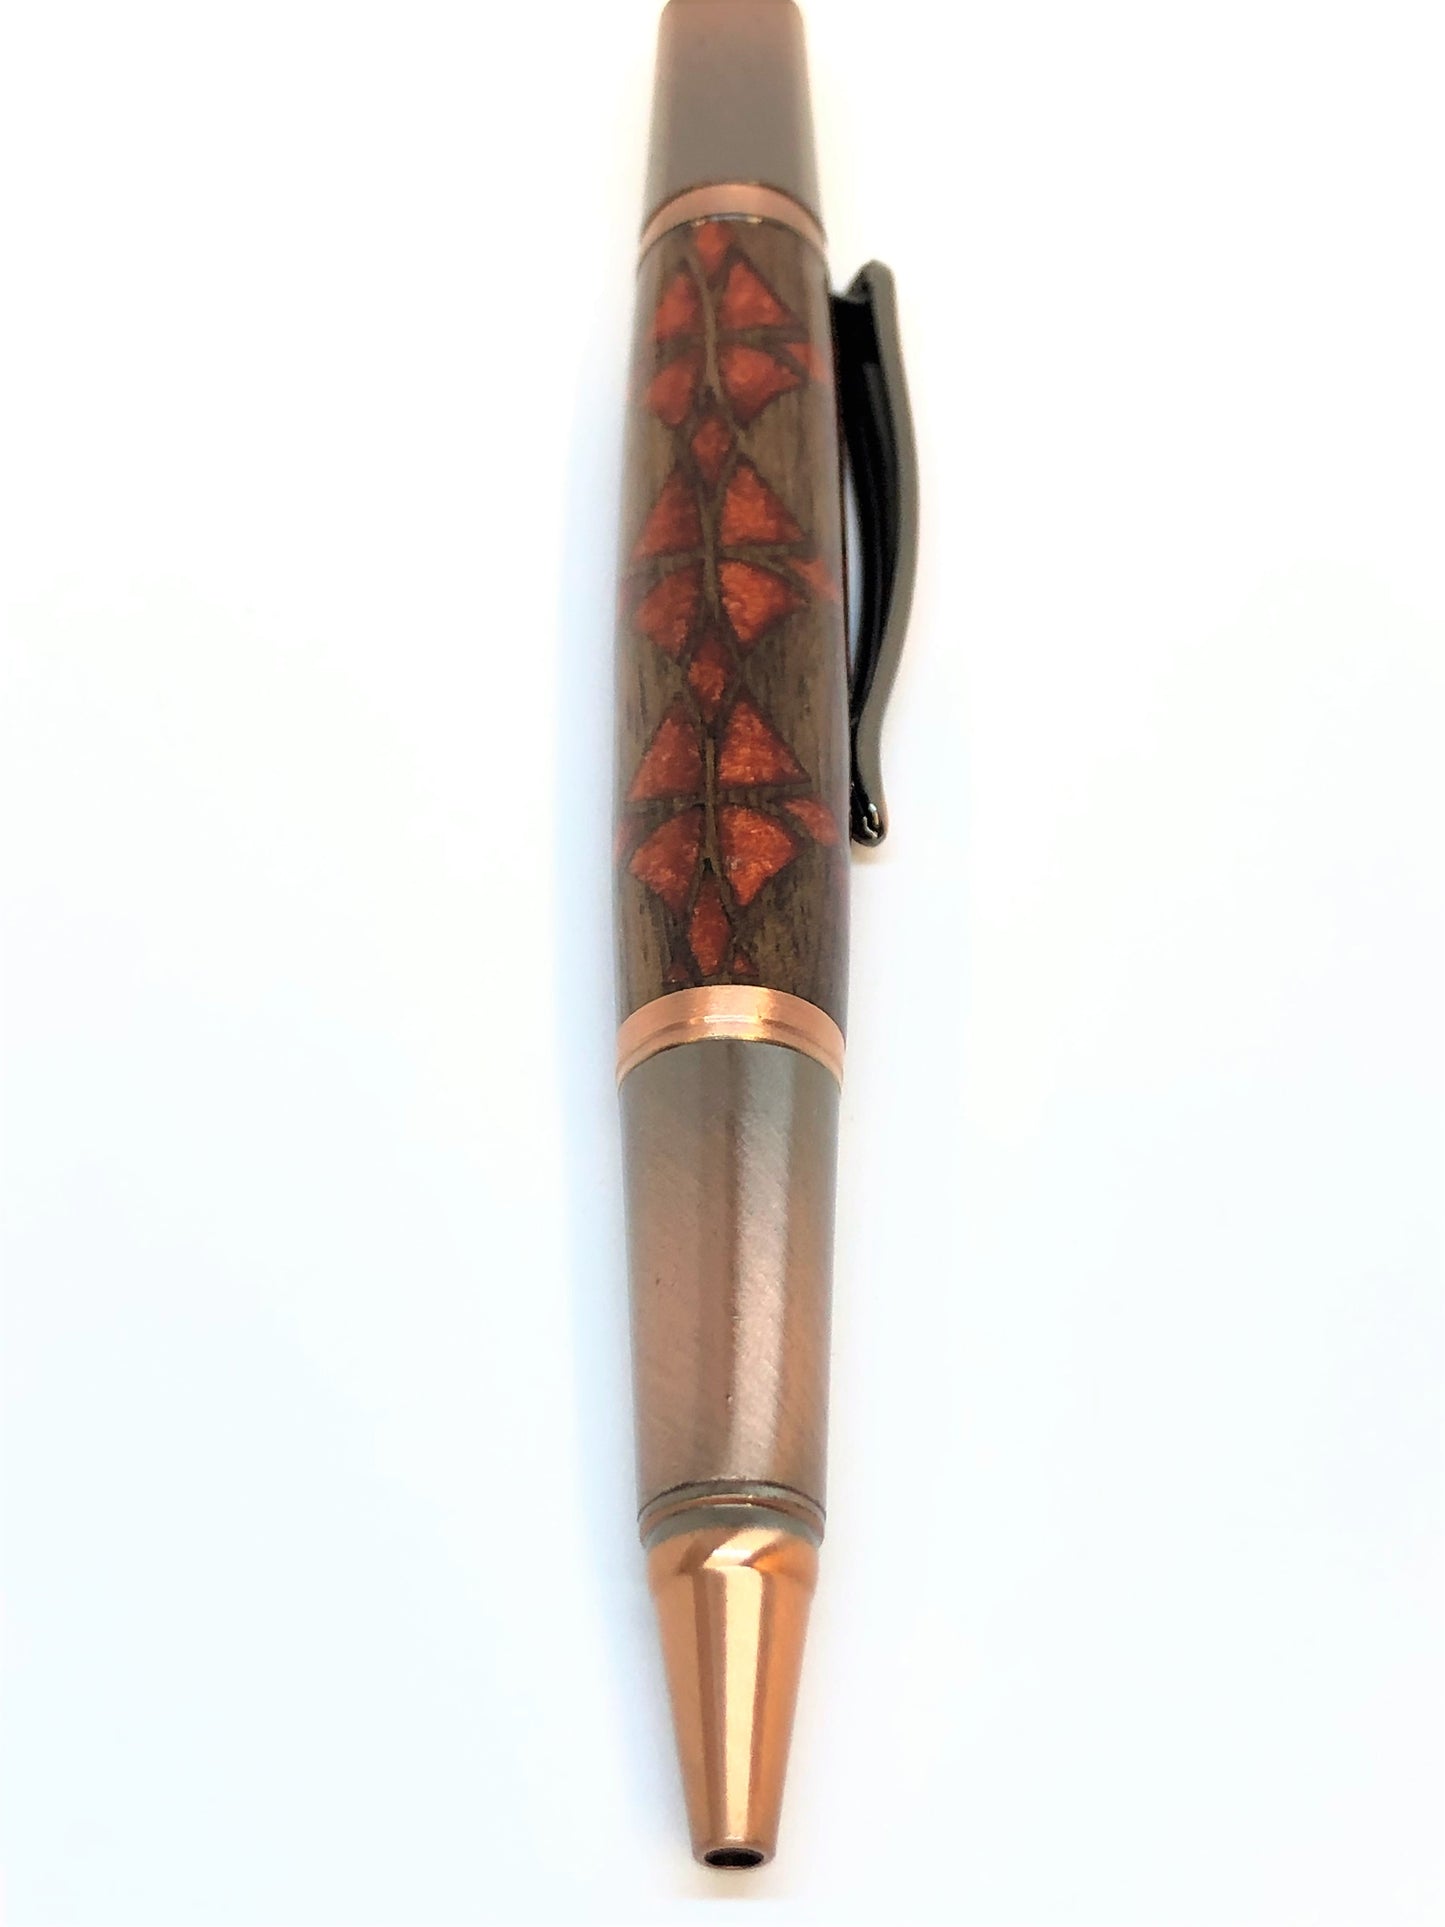 Sirocco / Antique Copper - Hybrid / Walnut Cutout and Copper Resin